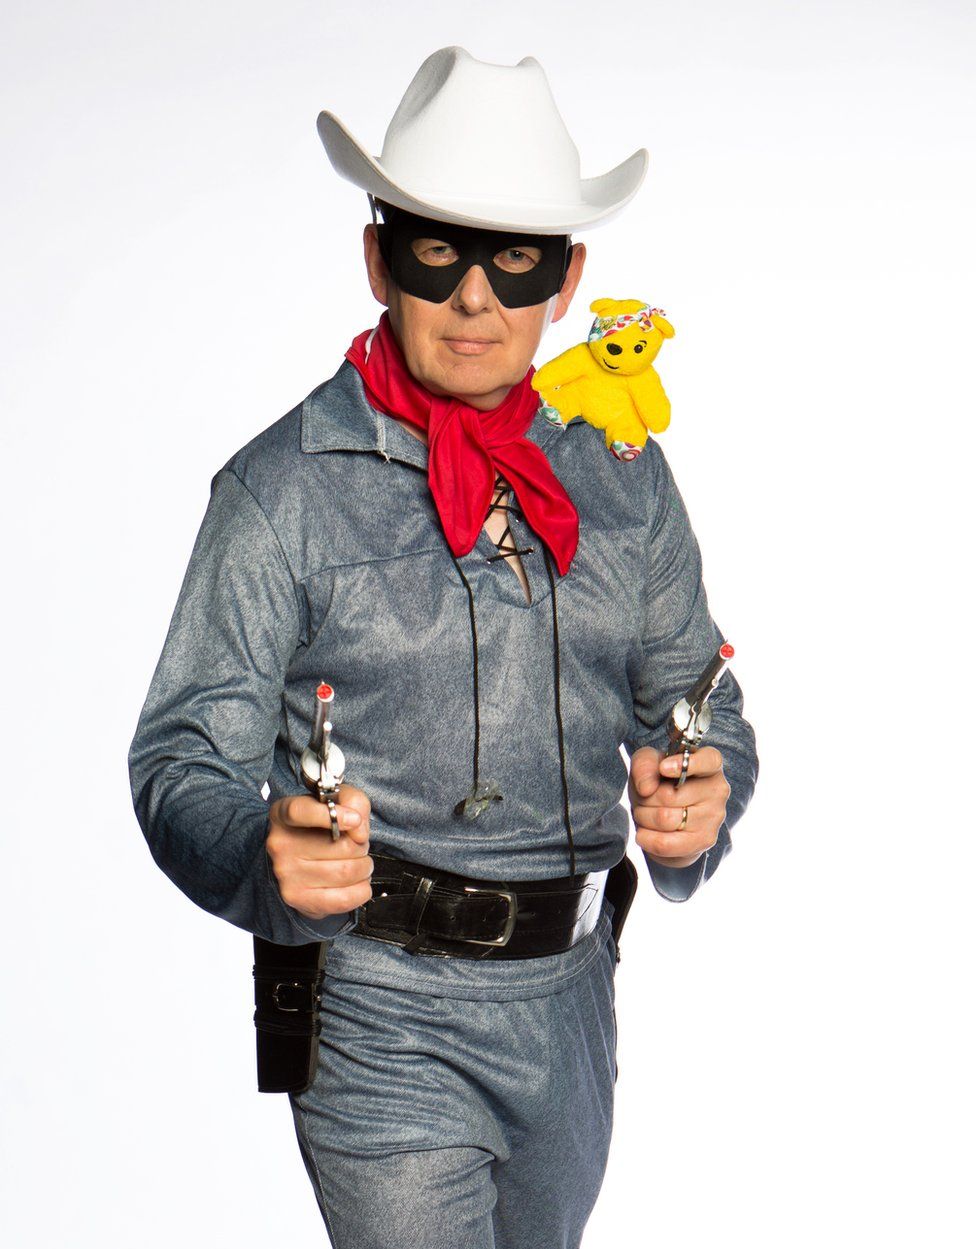 Bill Turnbull dressing up as the Lone Ranger for Children in Need